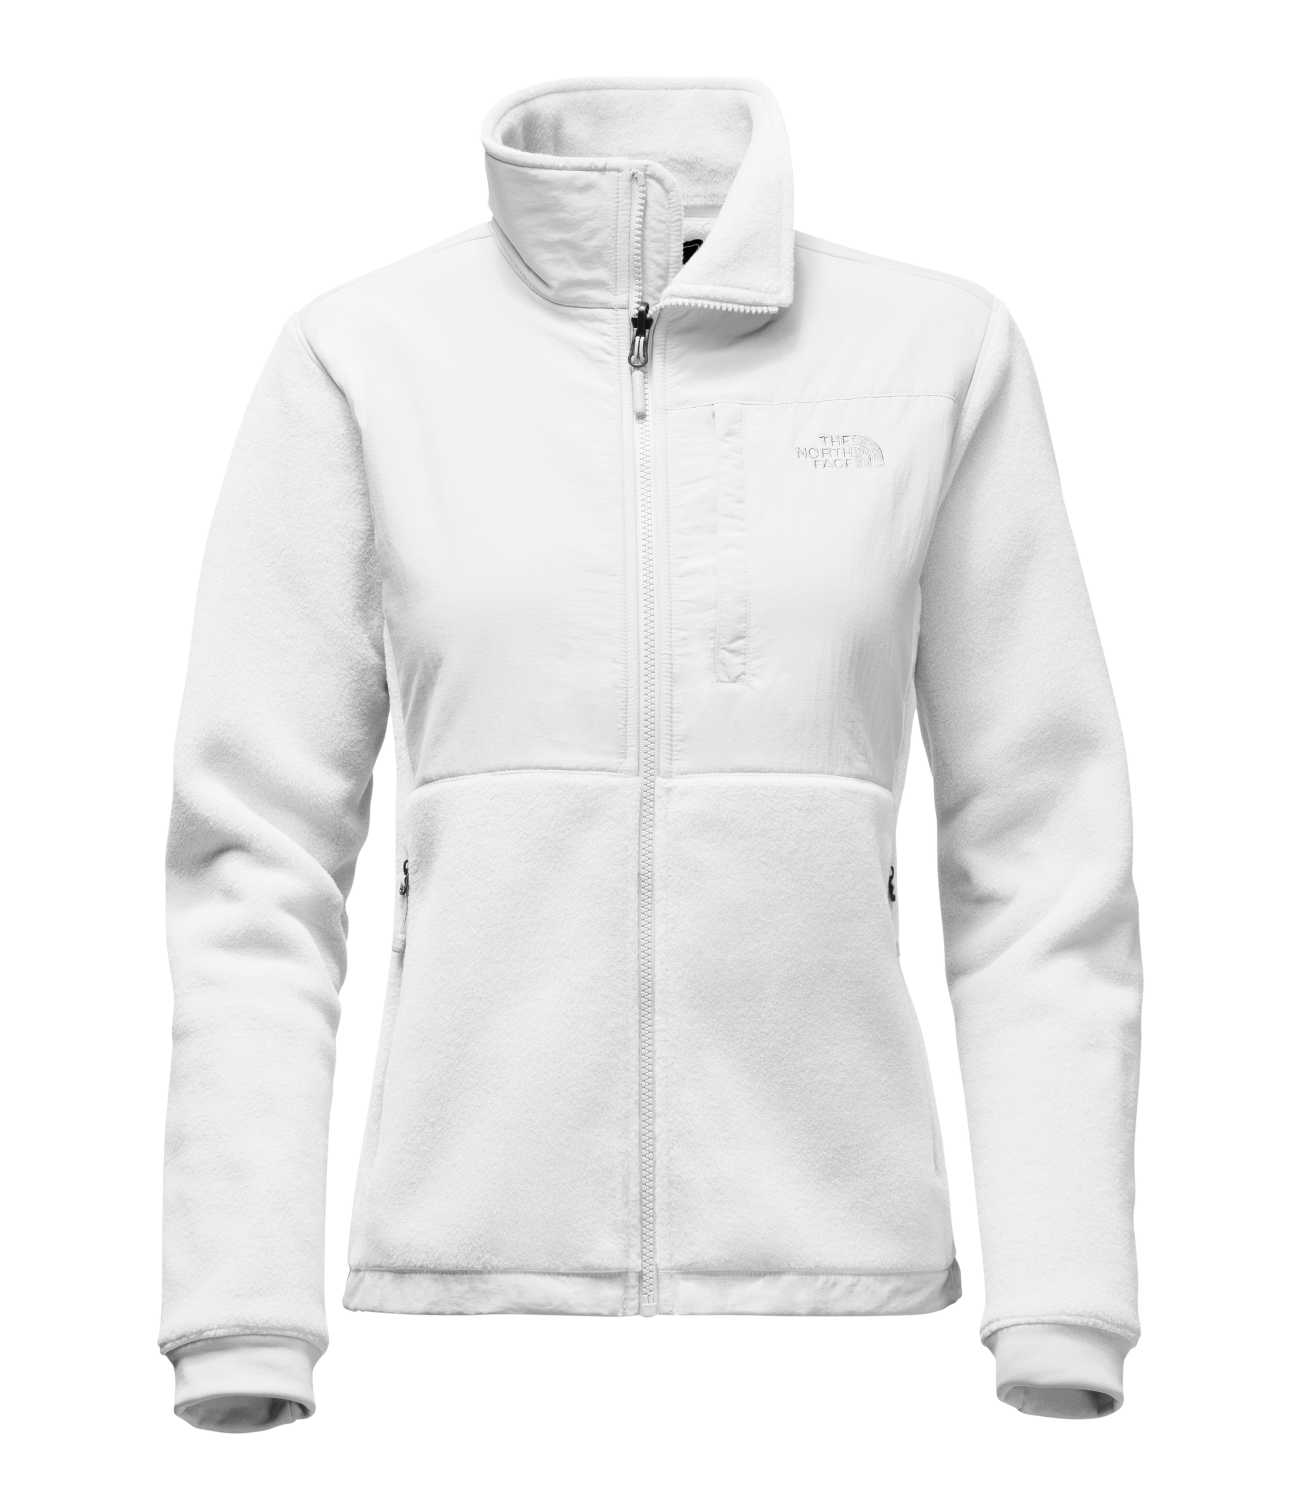 WOMEN'S DENALI 2 JACKET | The North Face | The North Face Renewed